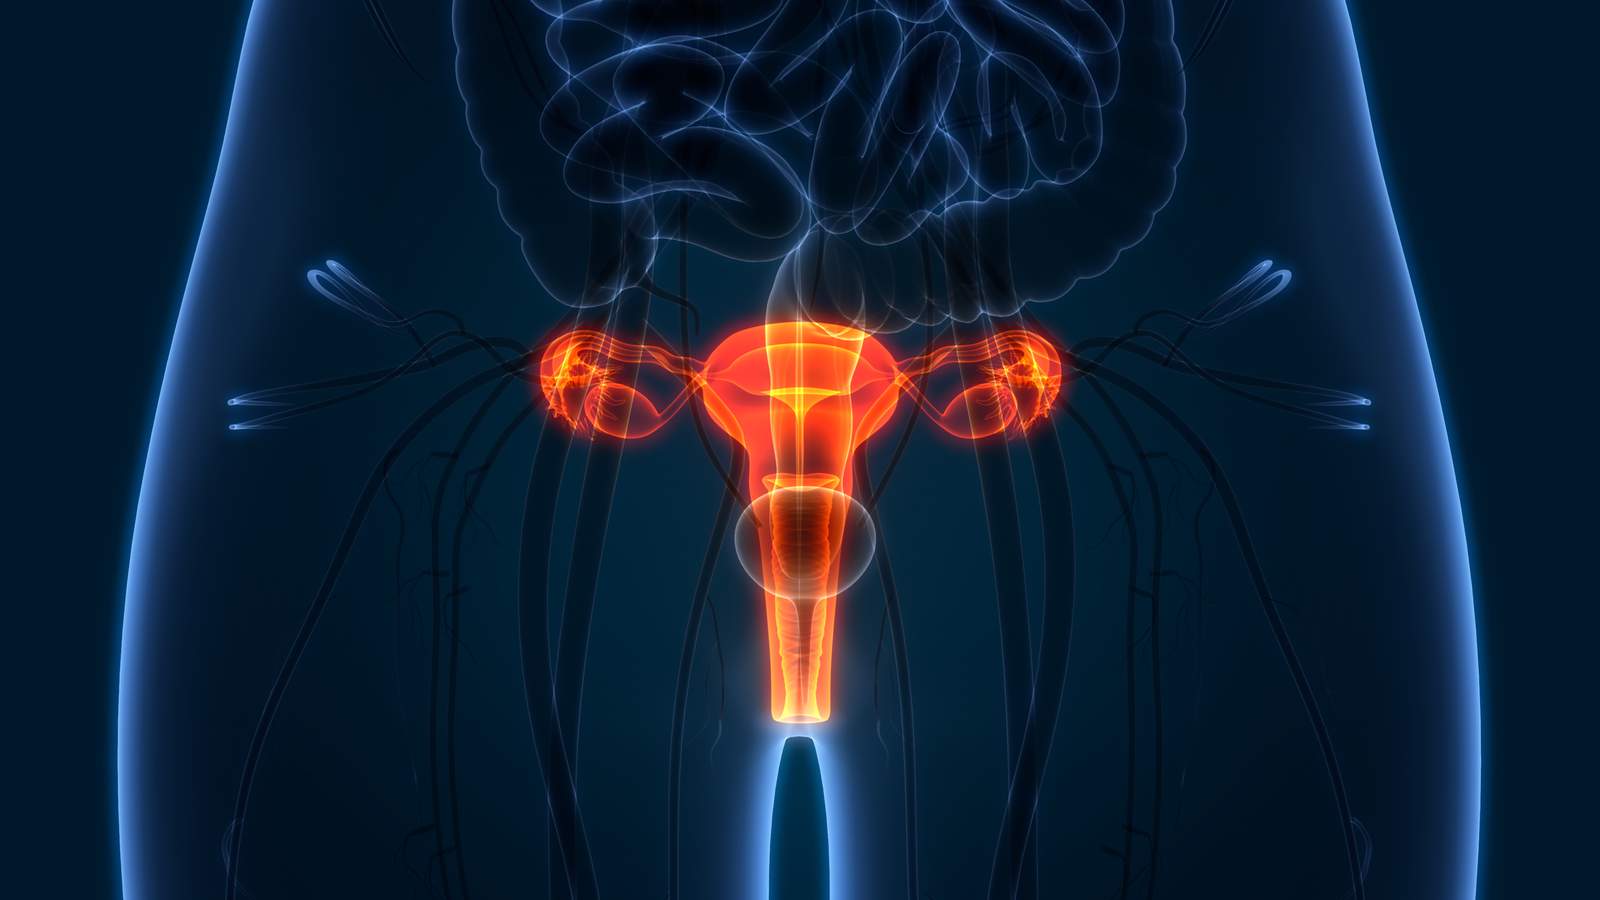 Ovarian cancer -- or is it?